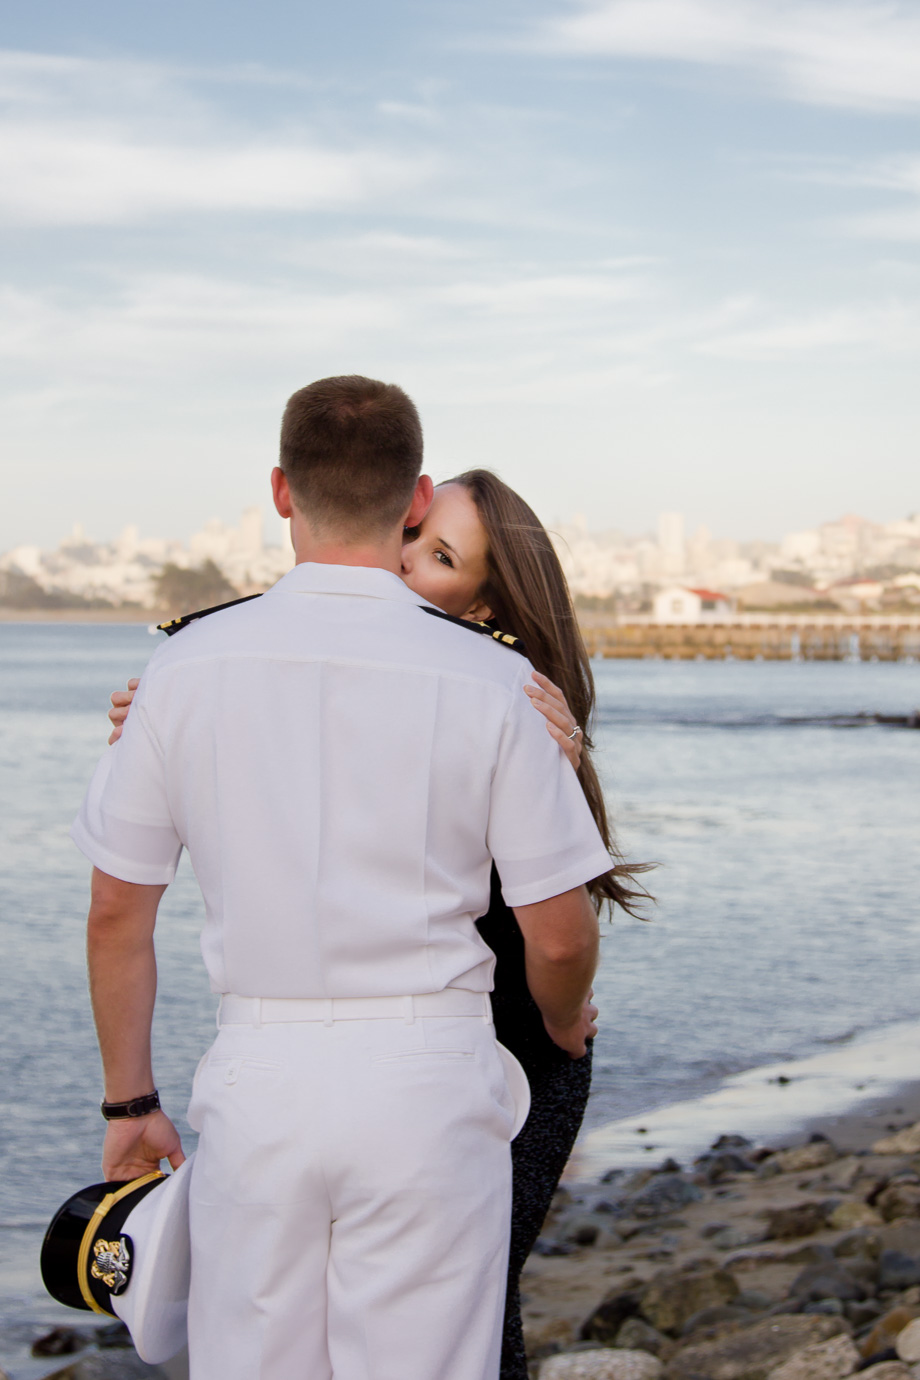 Kissing his neck peeking over his shoulder as he holds his US Navy cap and looks off into San Francisco Bay